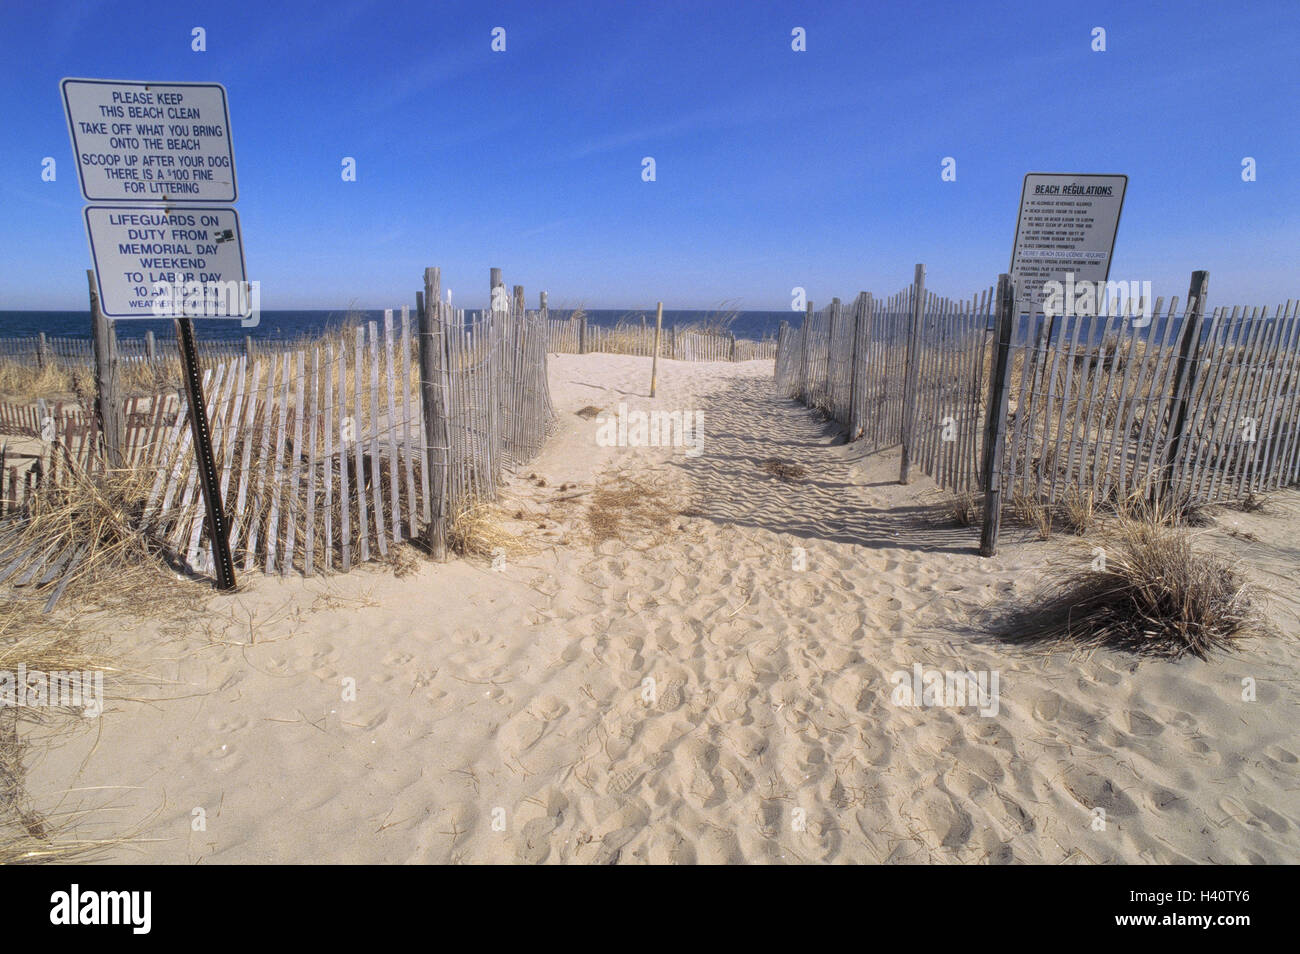 The USA, Florida, golf Mexico, Naples, sandy beach, fence, signs, America, beach, enclosure, wooden fence, signs, information, attention, information signs, beach rules, tips Stock Photo